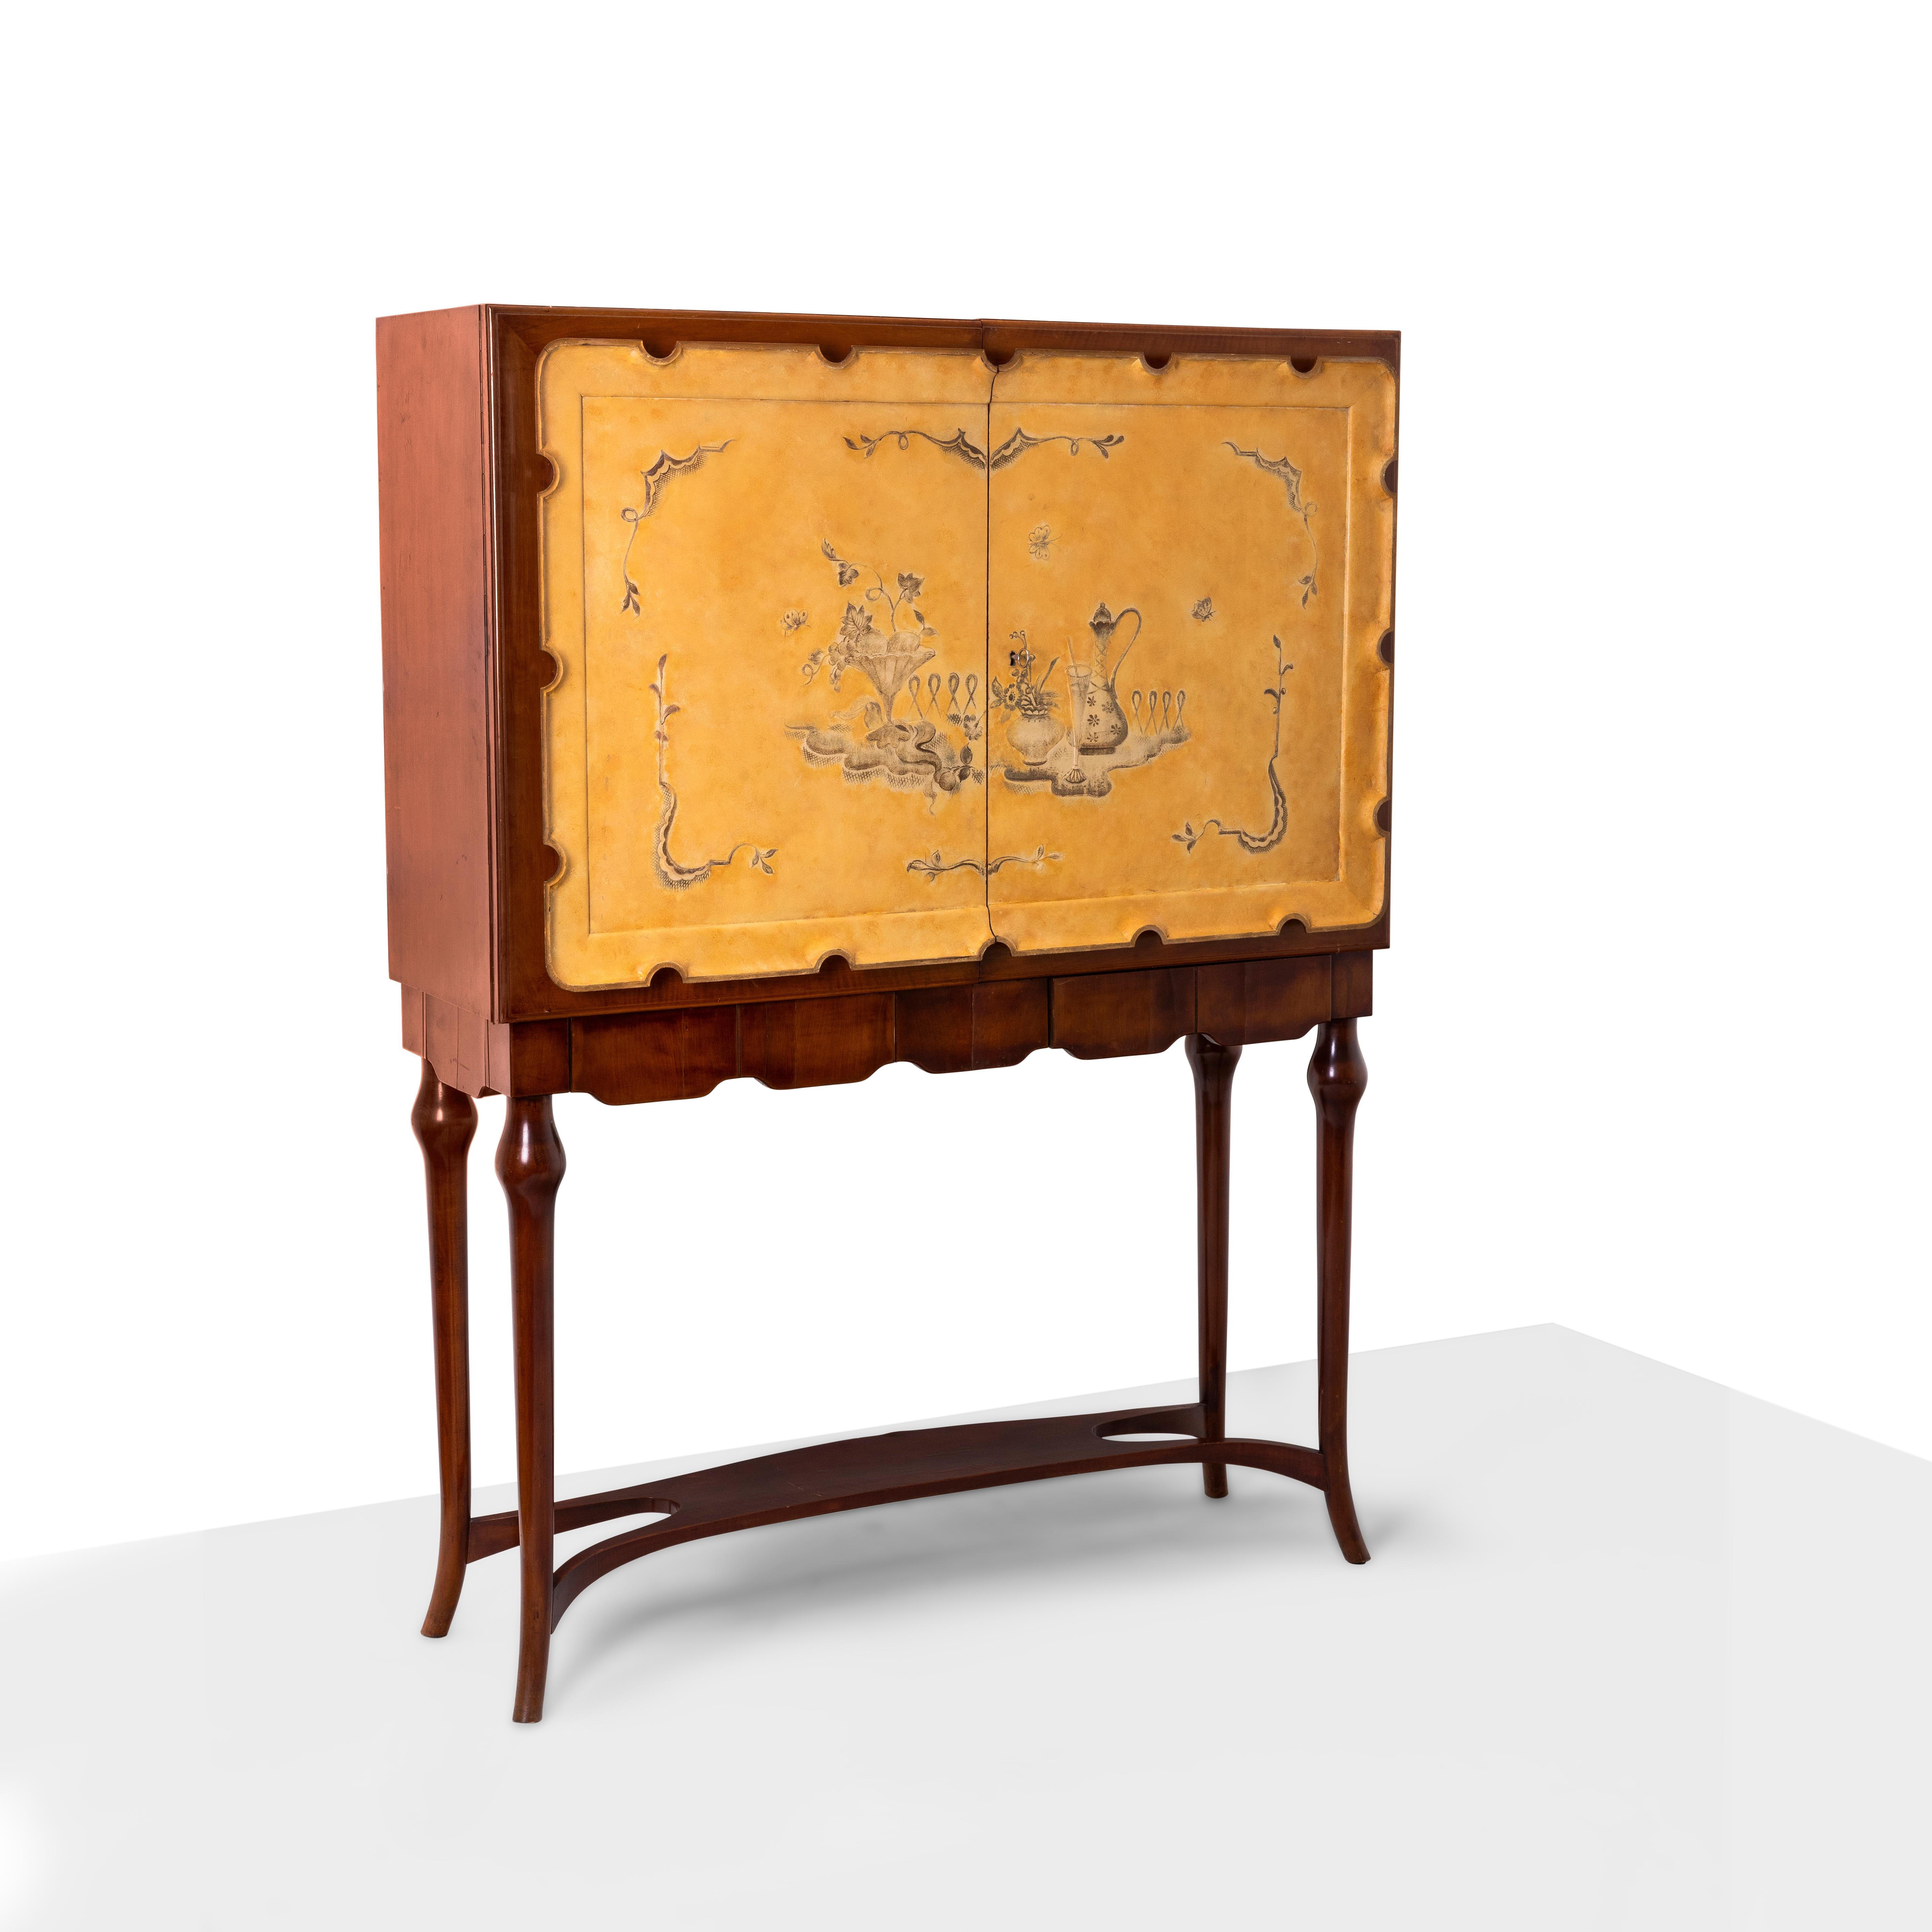 Rare wooden bar cabinet with polychrome enamel wall decoration in the shape of flowers. It is a piece of furniture that can be used in a dining room as a bar cabinet or in a kitchen as a larder, to be included in a décor that will enhance its beauty